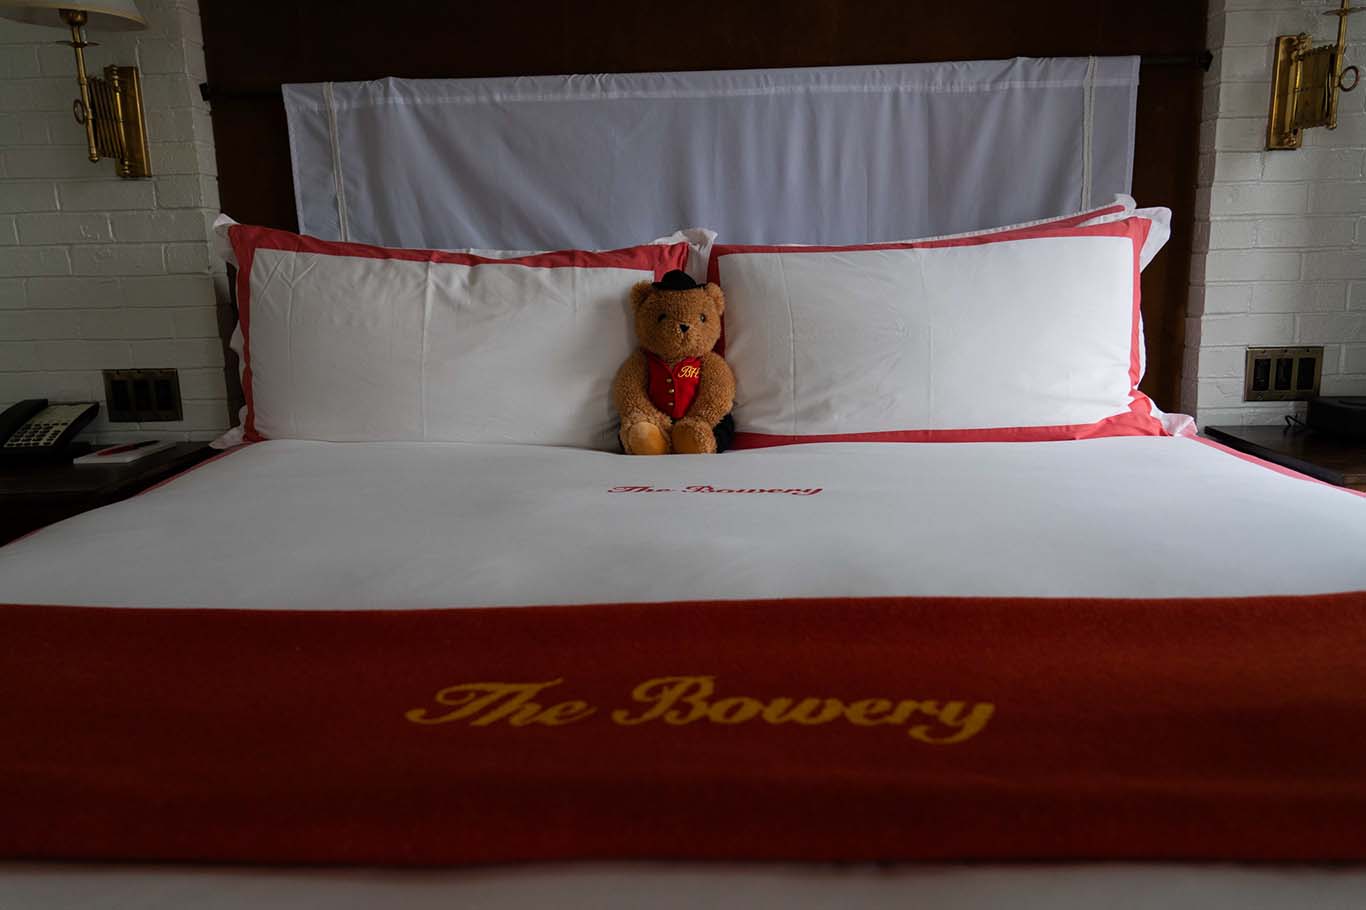 The Bowery Hotel Bo the Bowery bear will keep you warm at night, in this super comfy bed